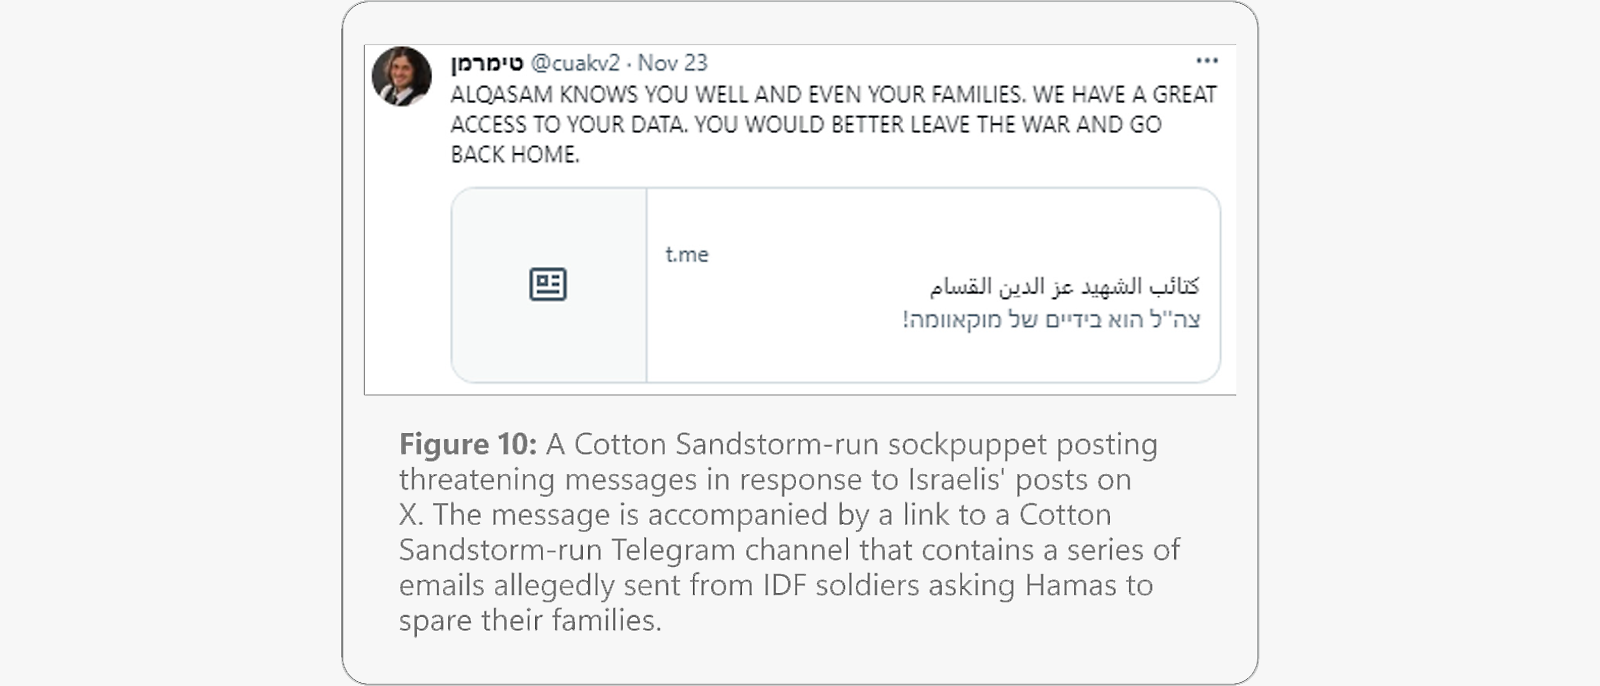 Threatening message from alleged Cotton Sandstorm-run sockpuppet, referencing access to personal data and encouraging leaving the war.